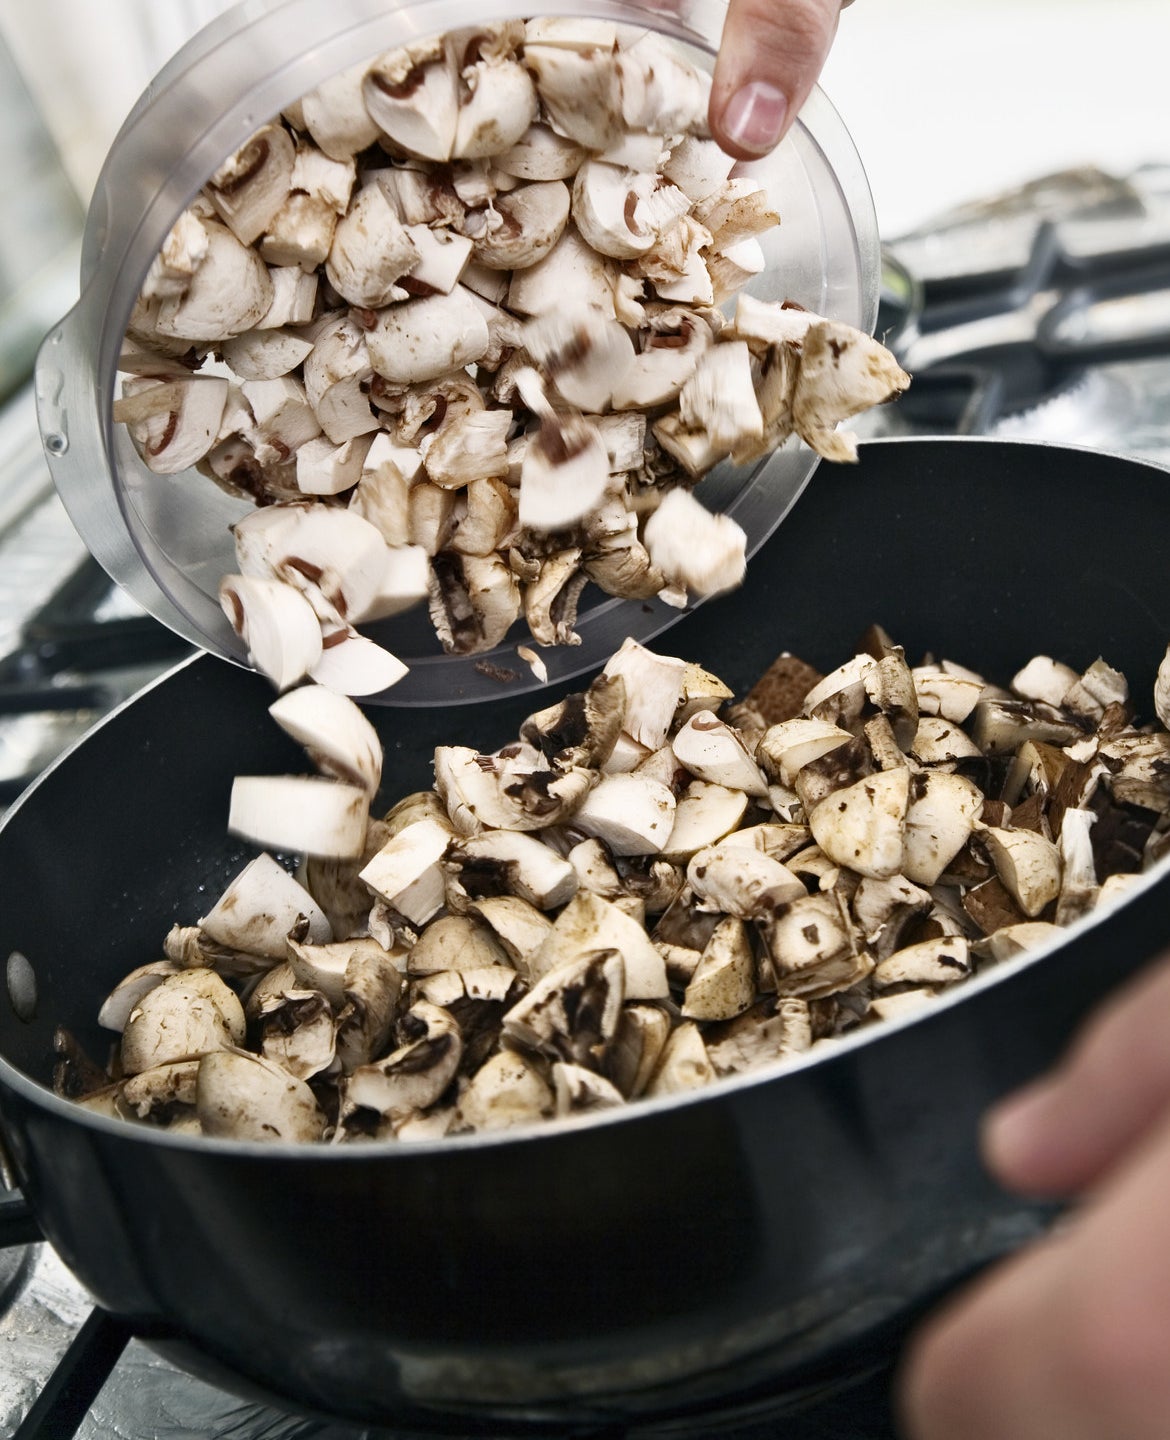 Mushrooms being poured into a pan.